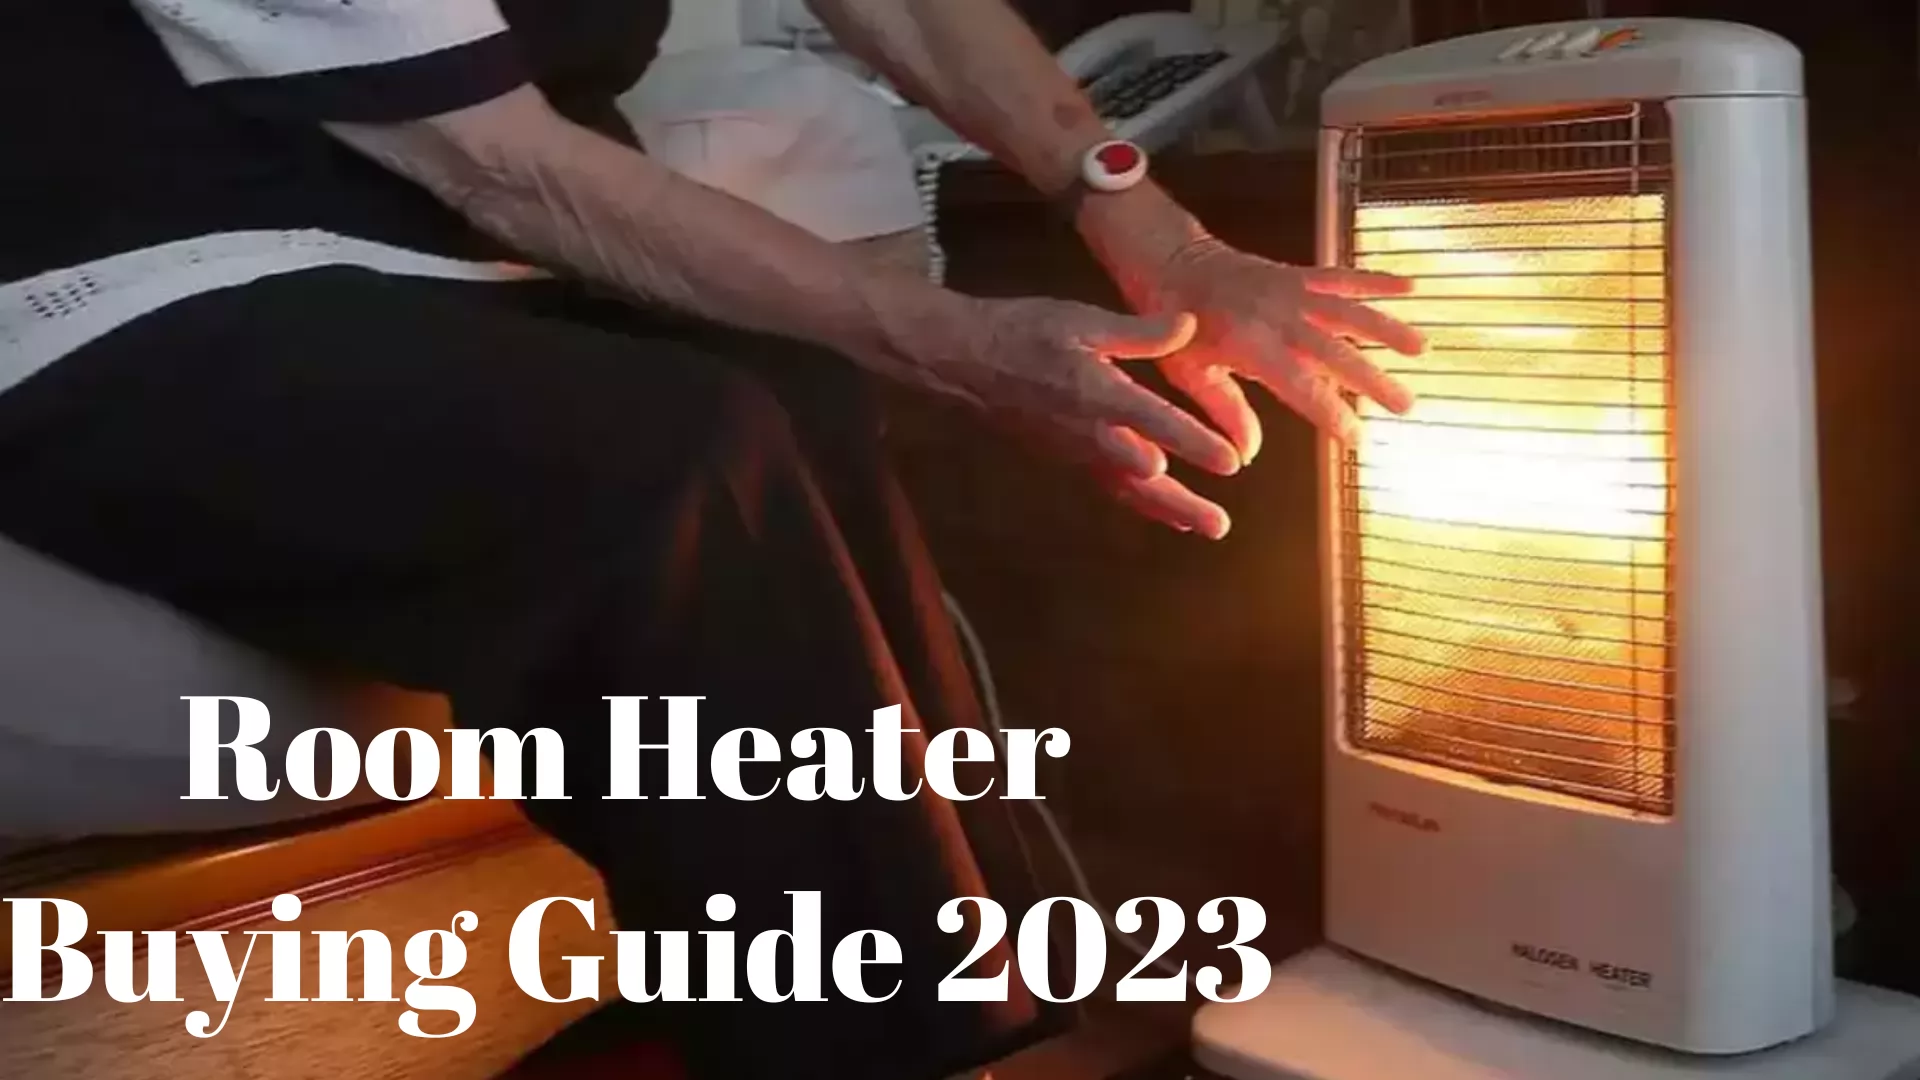 Room Heater Buying Guide 2023